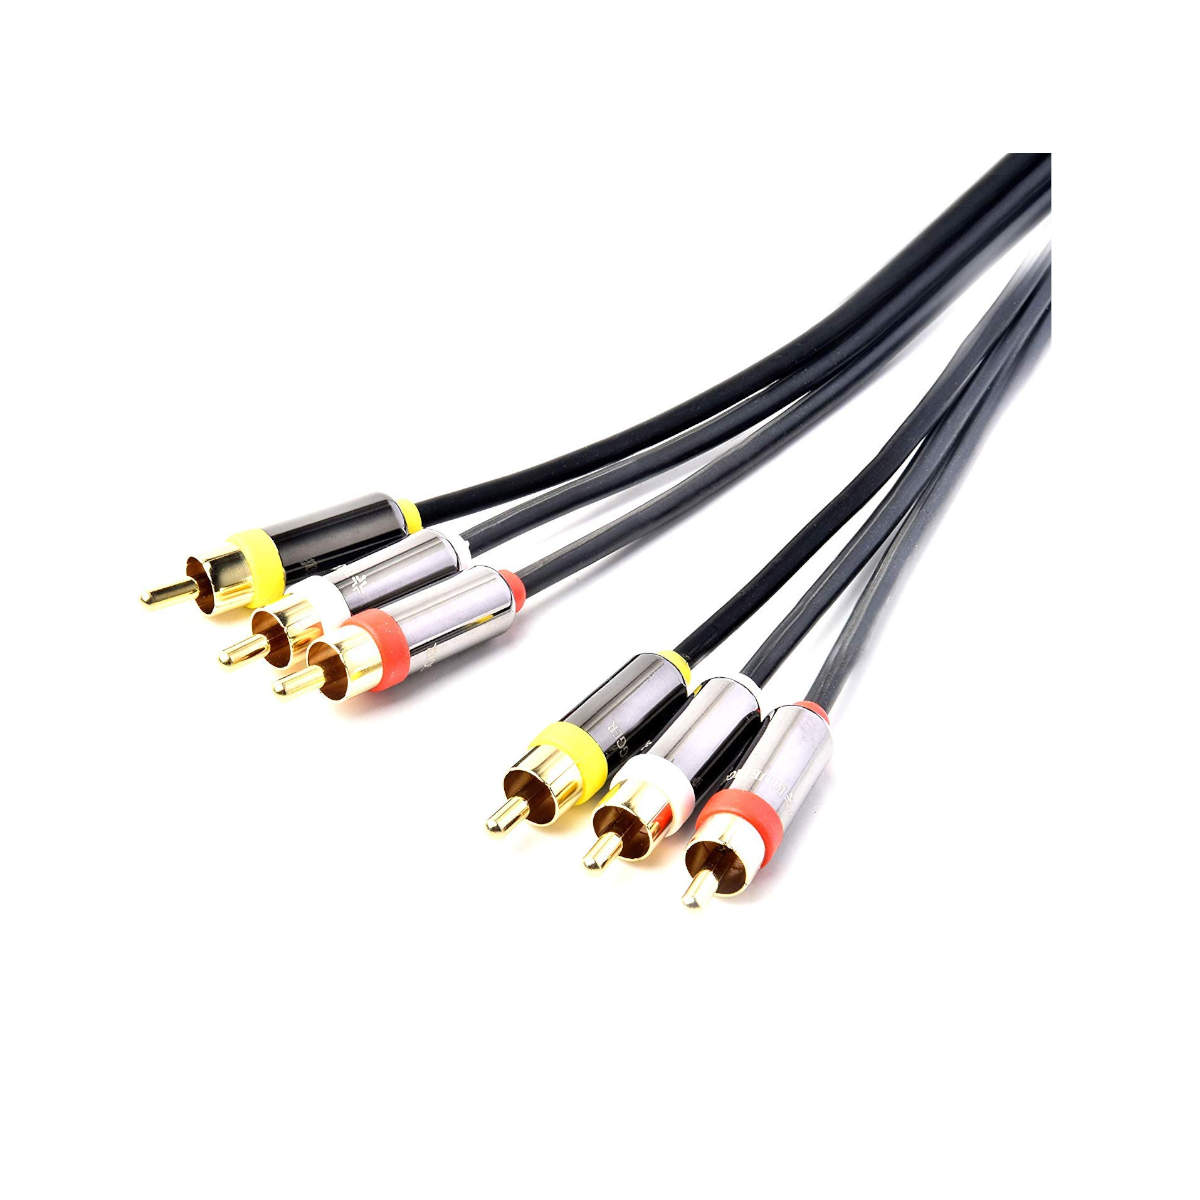 BlueRigger RCA Stereo Cable - 3 x RCA Male to 3 x RCA Male Audio Cable